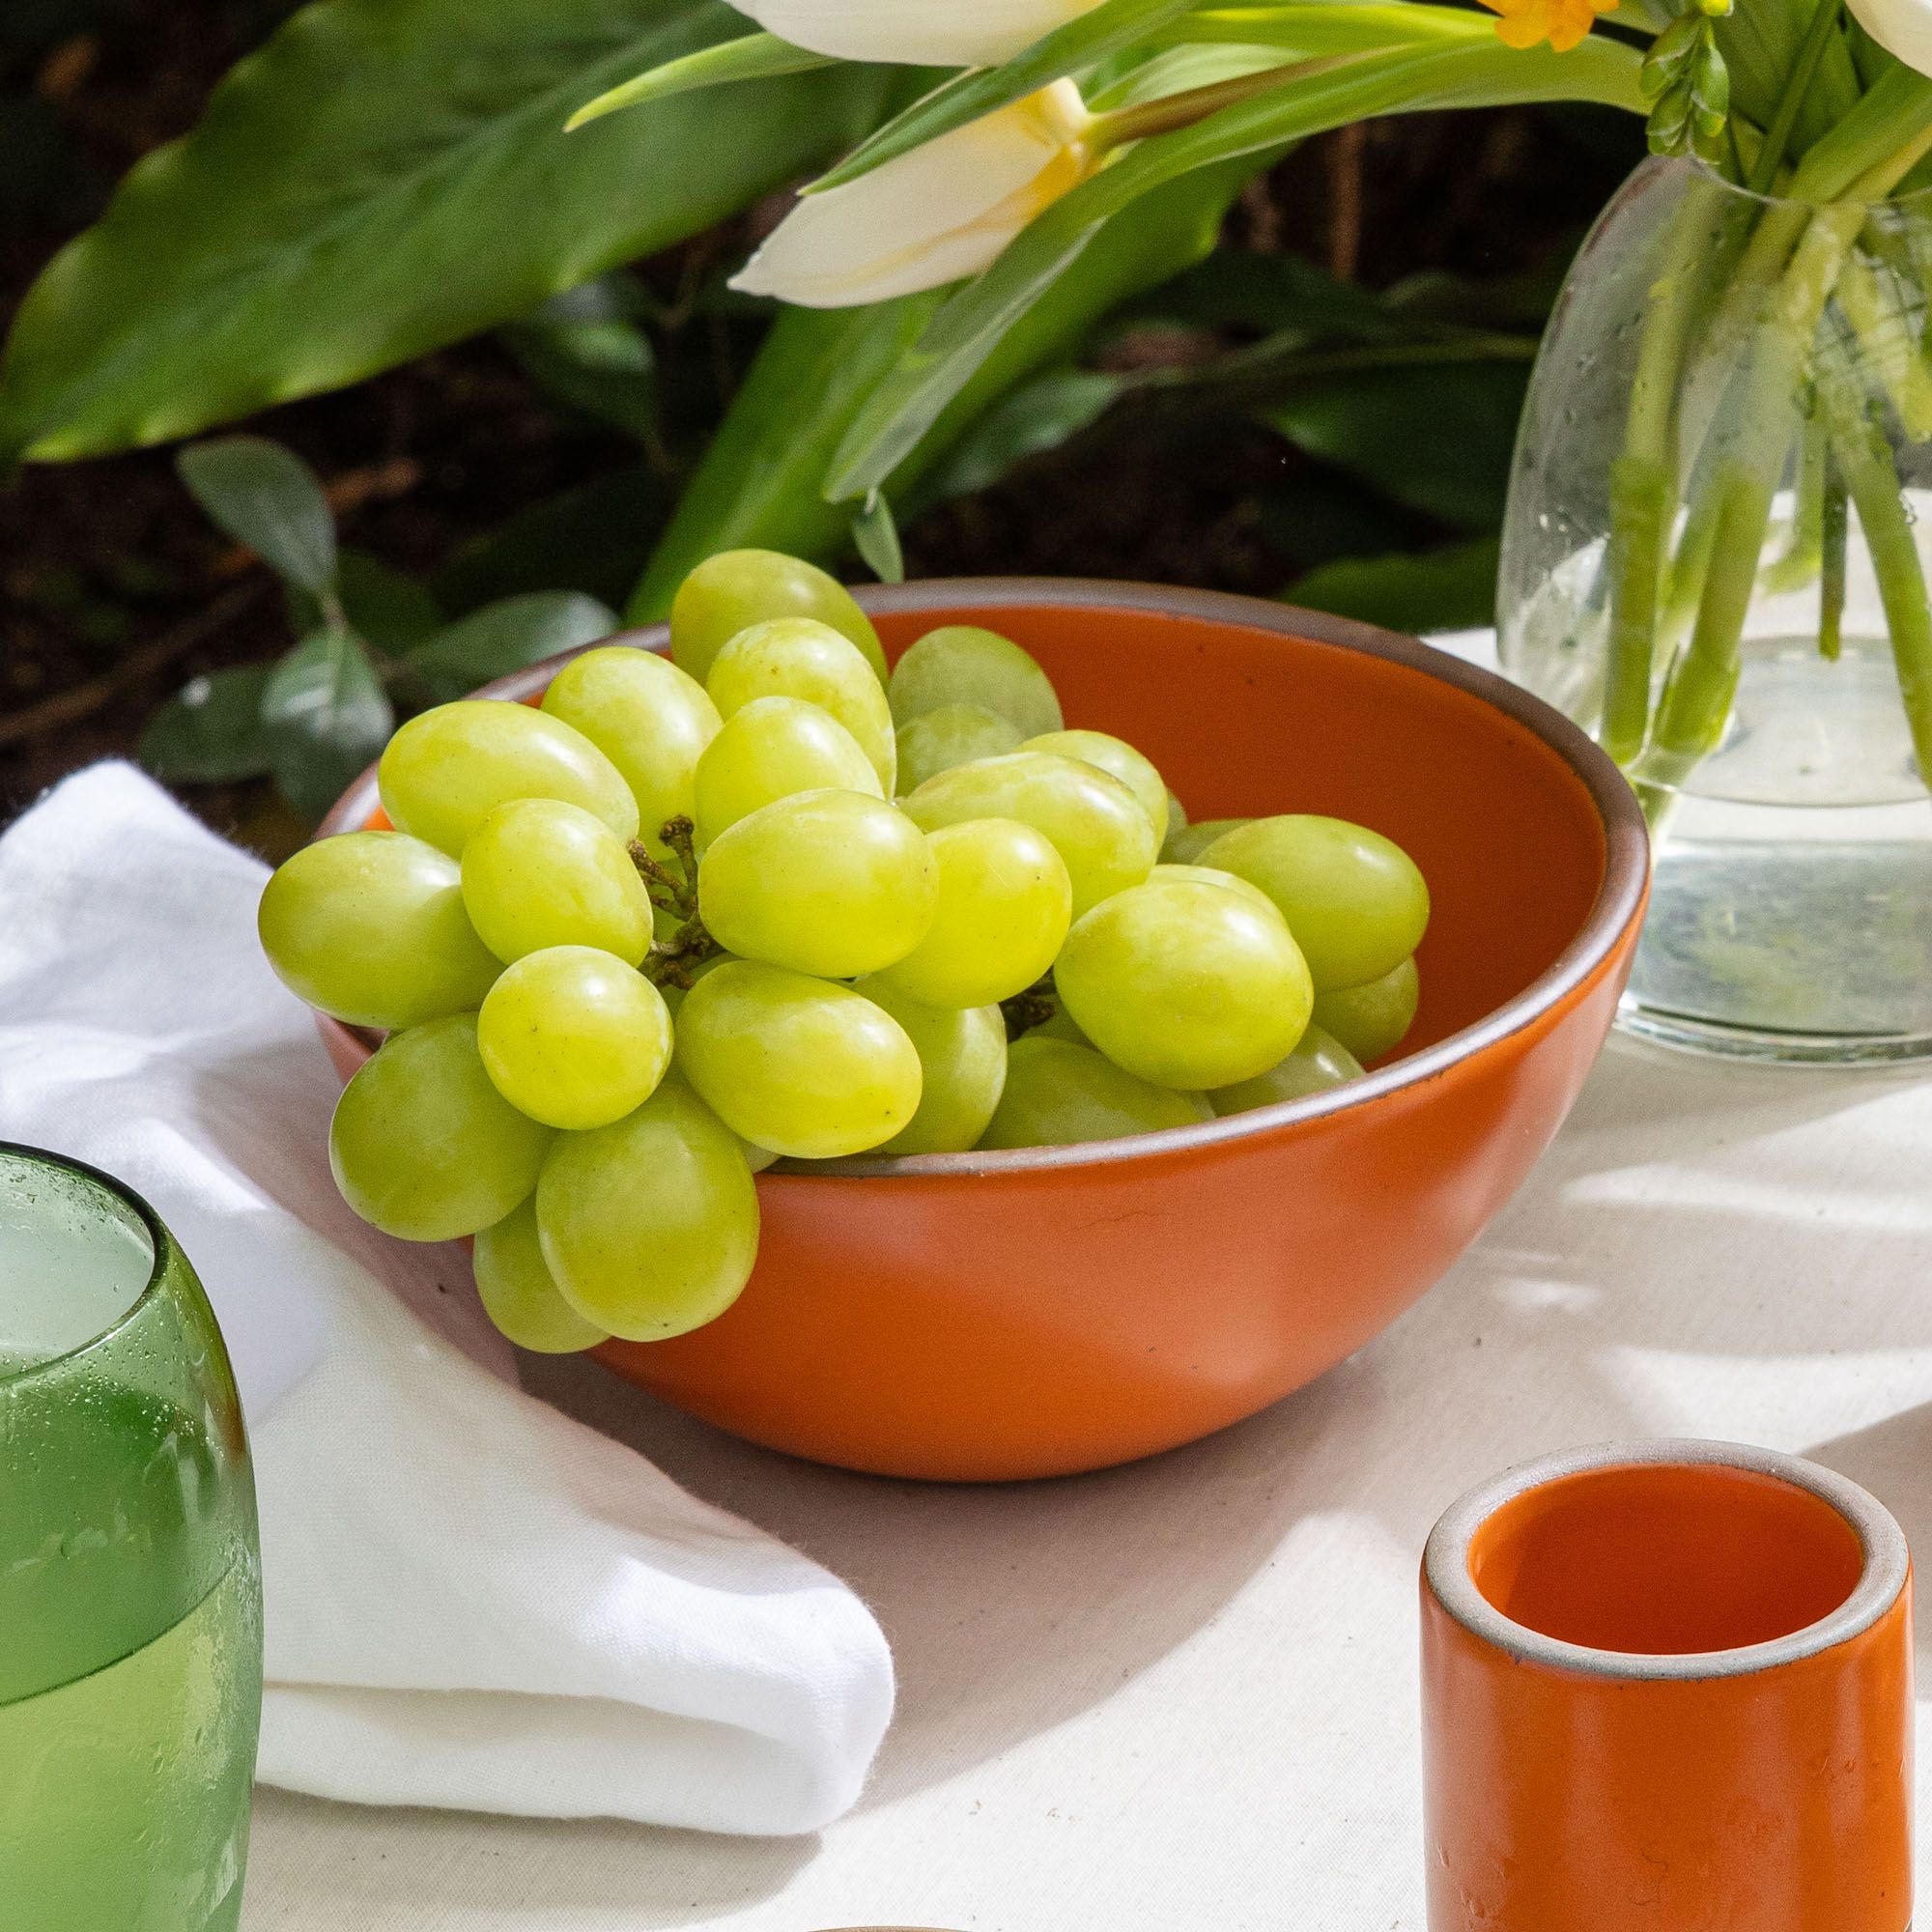 On a table sits a bold orange bowl with green grapes, surrounded by a clear vase, tiny cup, and white napkin